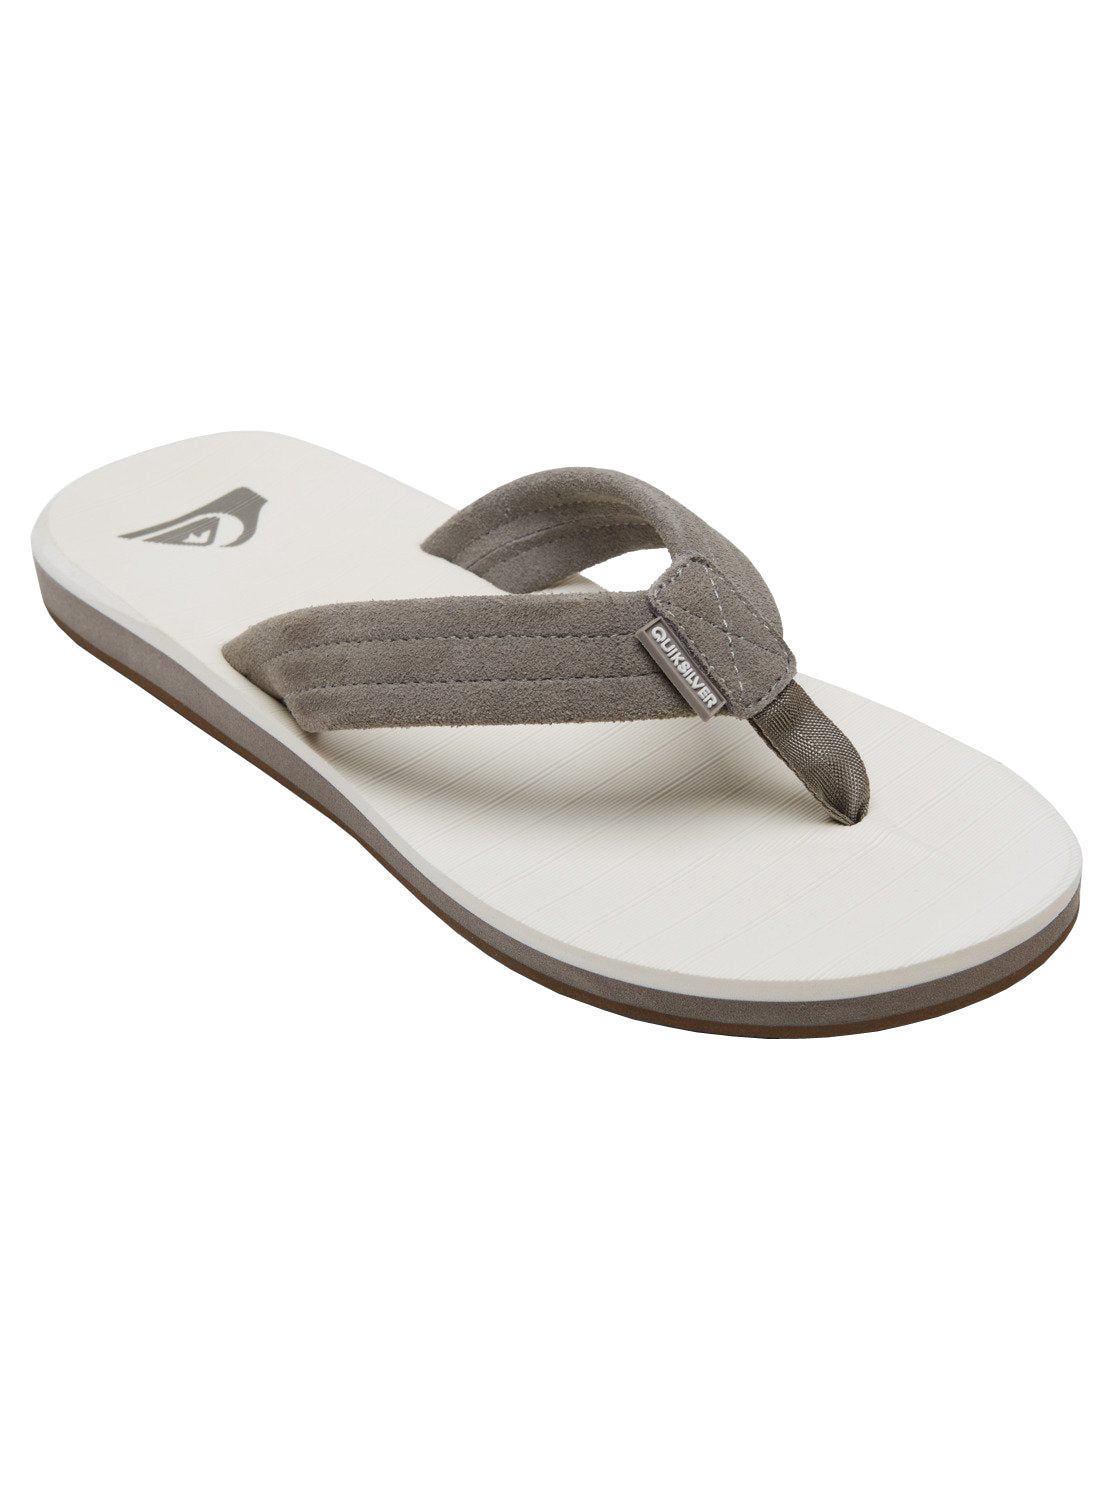 Quiksilver Carver Suede Mens Sandal XSWS-Grey-White-Grey 10